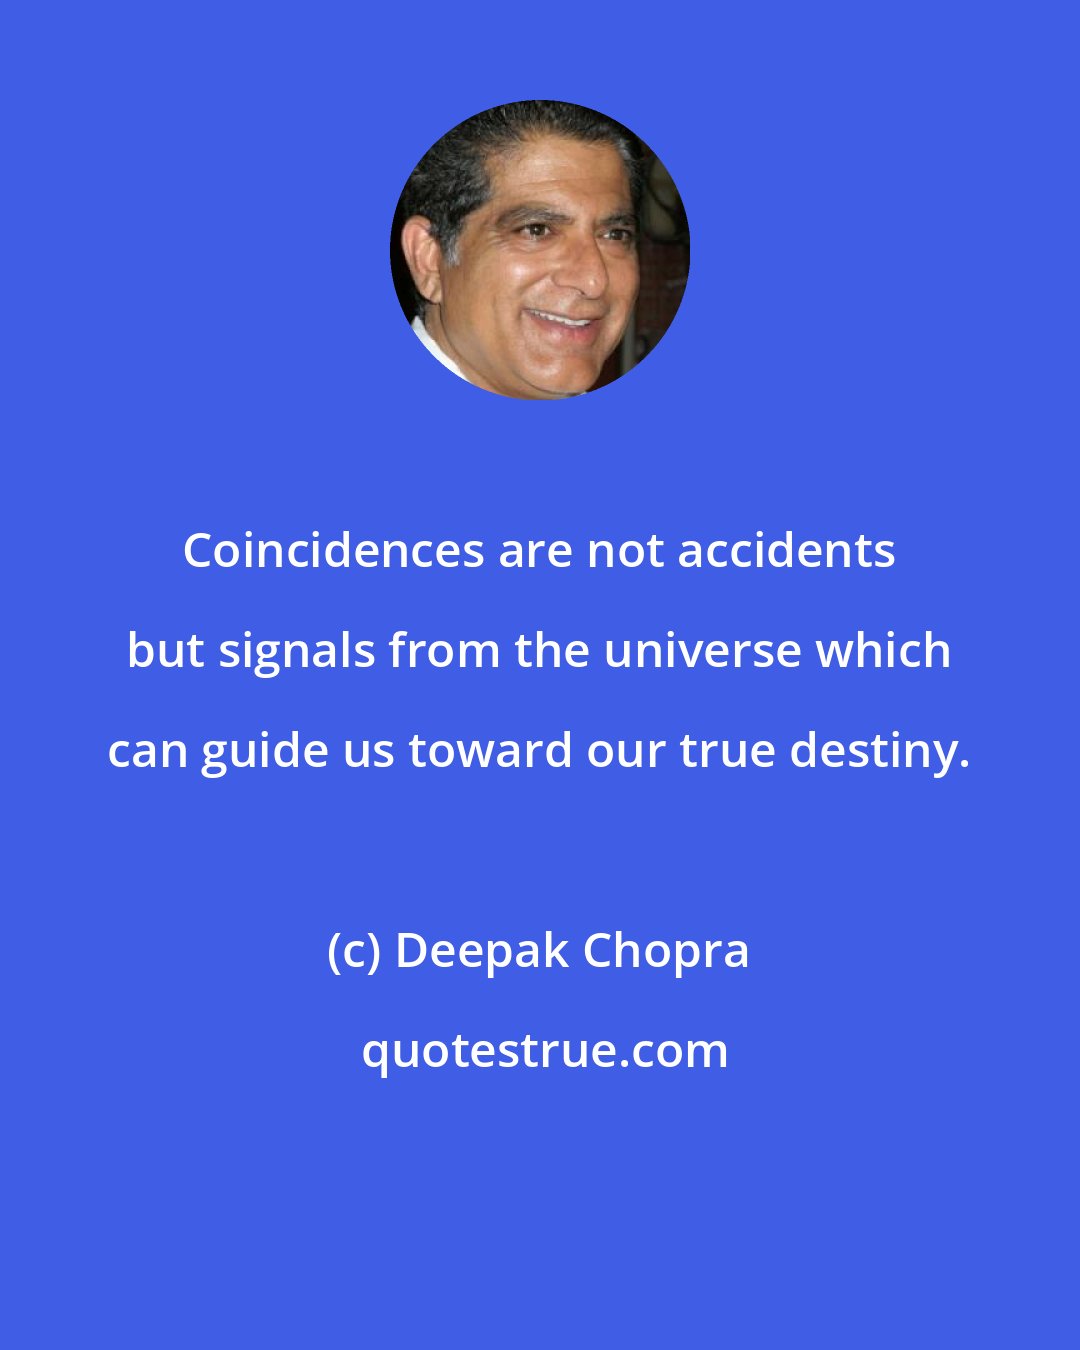 Deepak Chopra: Coincidences are not accidents but signals from the universe which can guide us toward our true destiny.